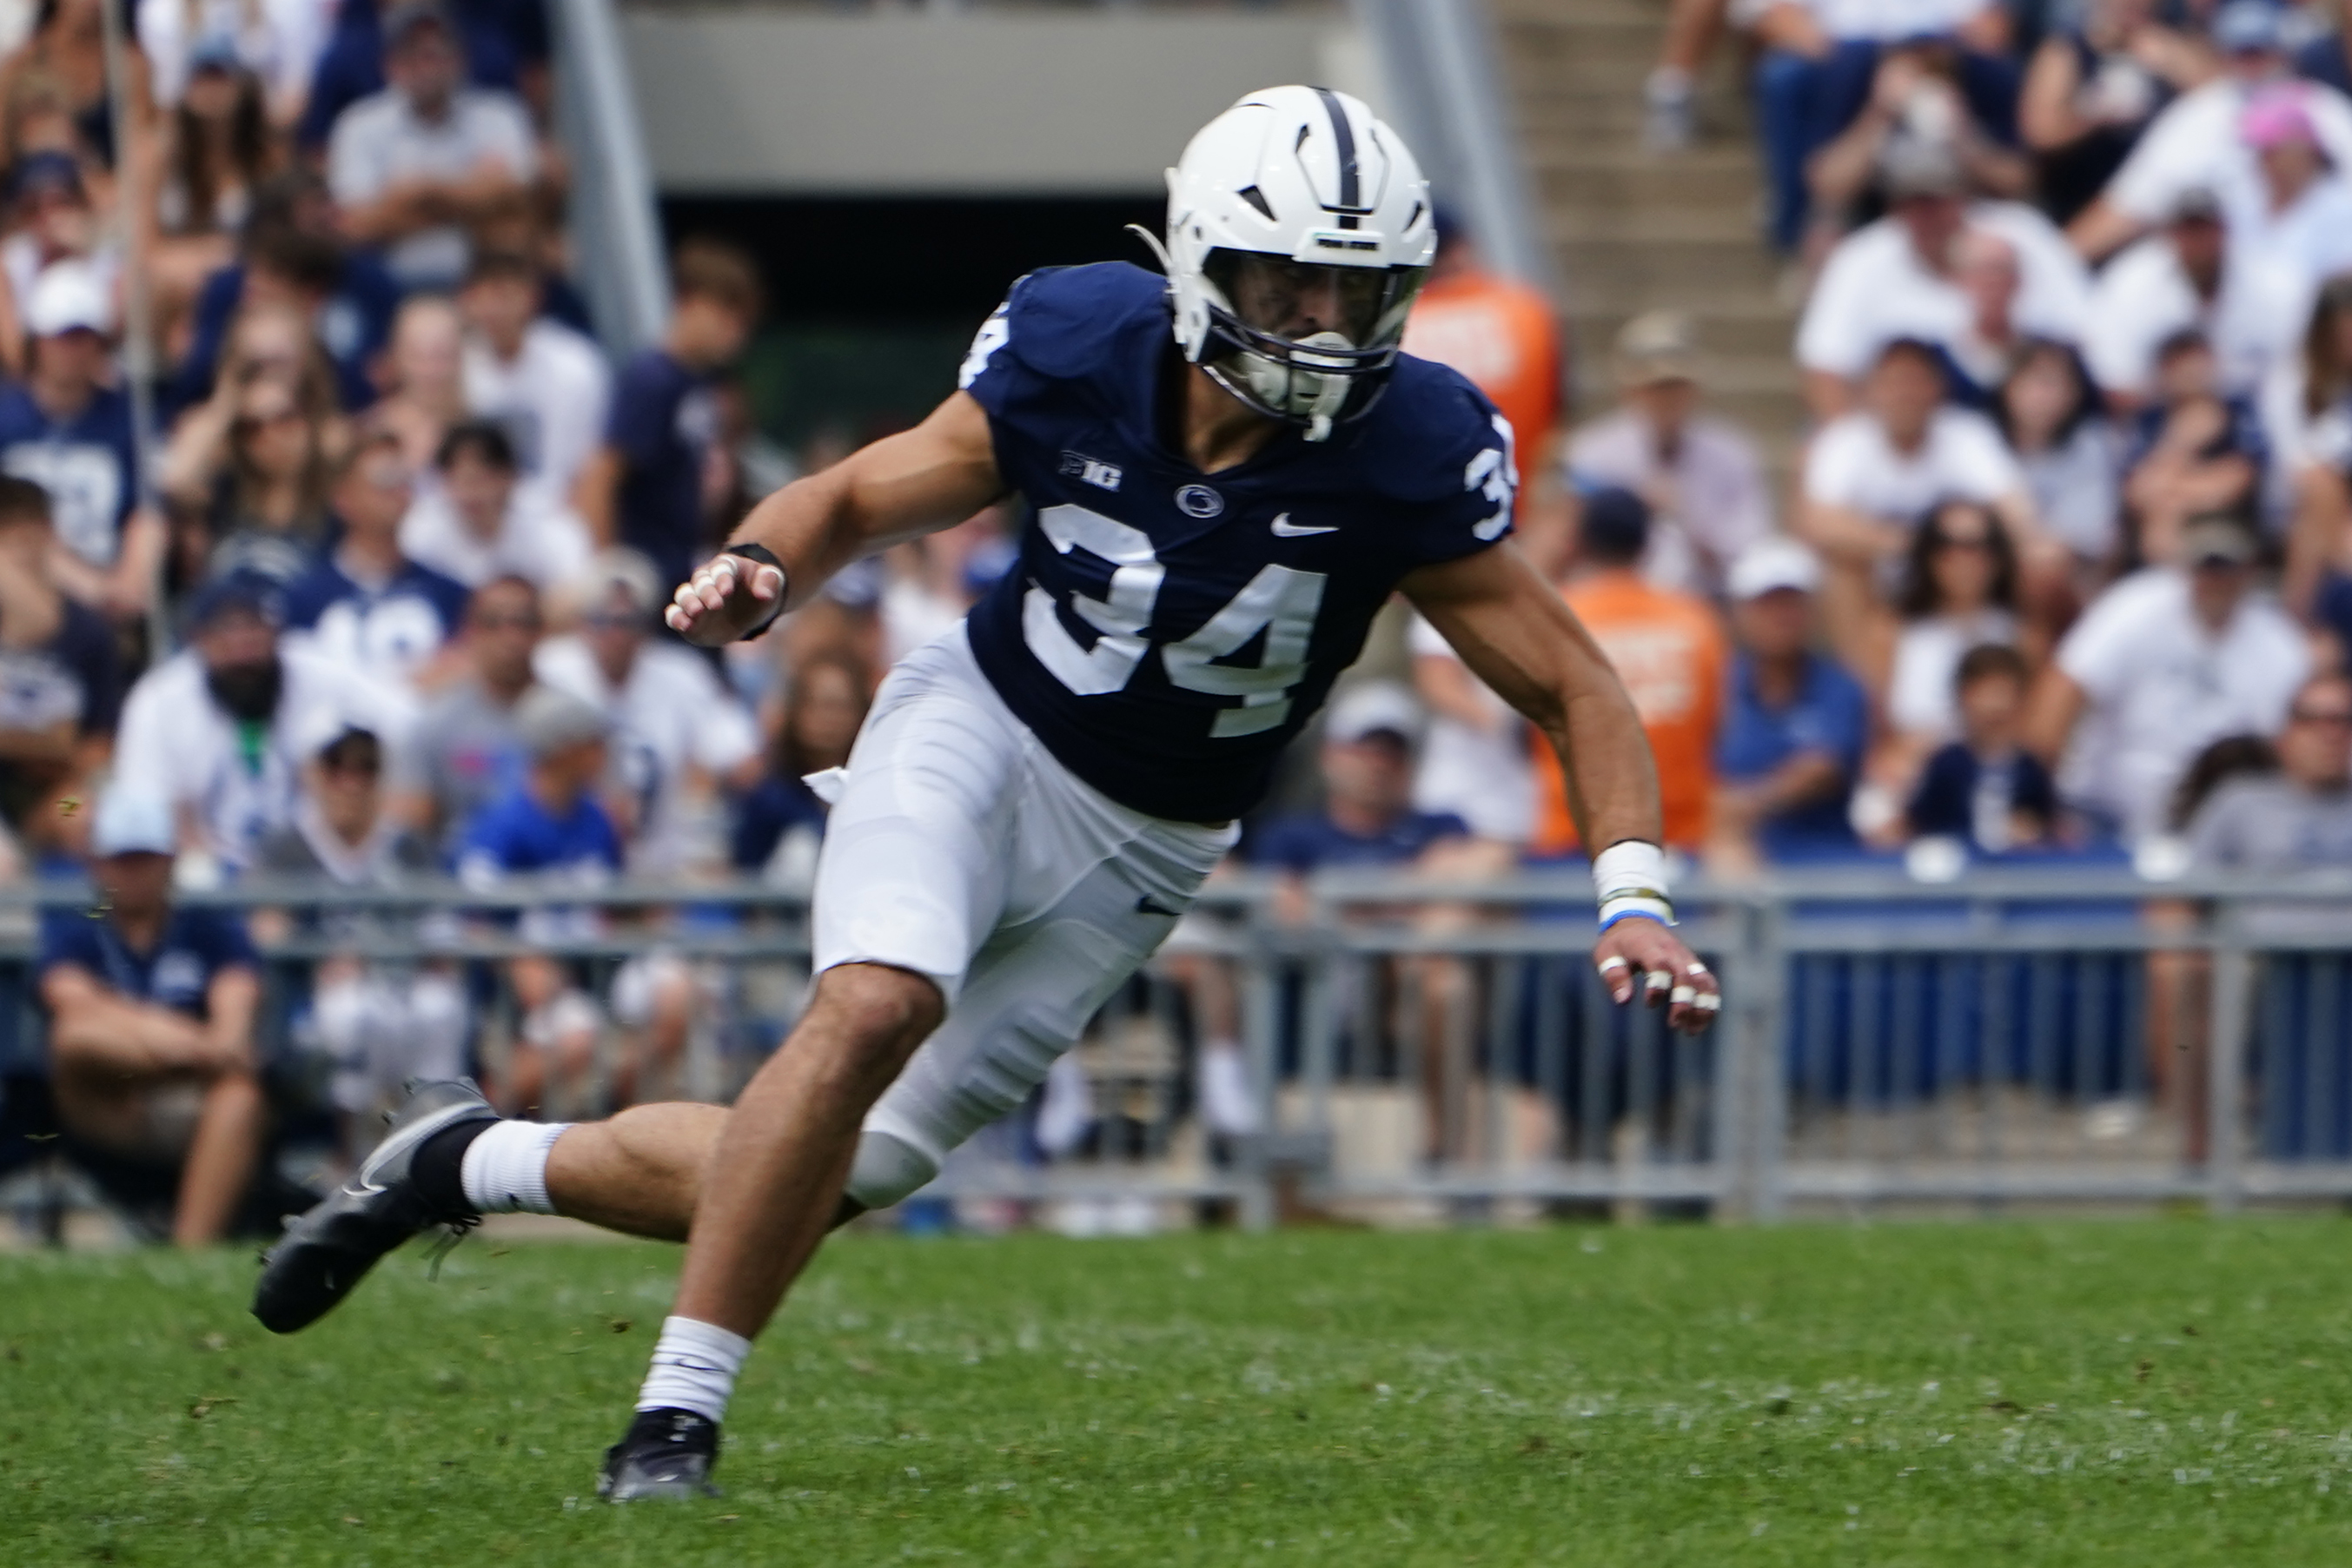 Penn State Nittany Lions Linebacker Dominic DeLuca (34) rushes the quarterback during the first half of the College Football game between the Ohio Bobcats and Penn State Nittany Lions on September 10, 2022. Dominic now wears Number Zero.